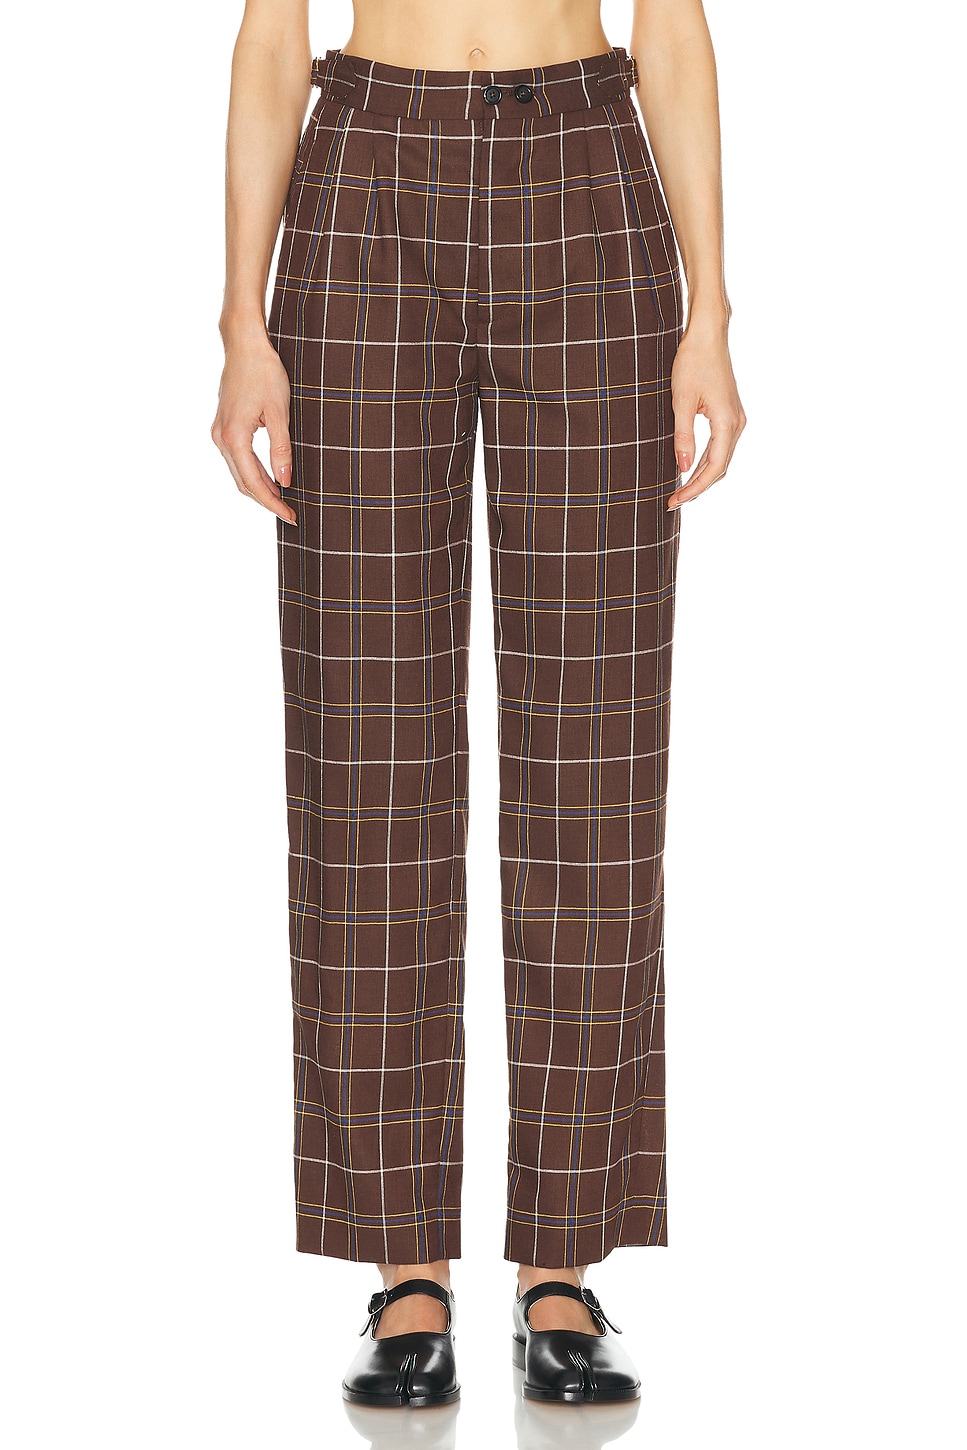 Image 1 of BODE Dunham Plaid Trouser in Brown Multi